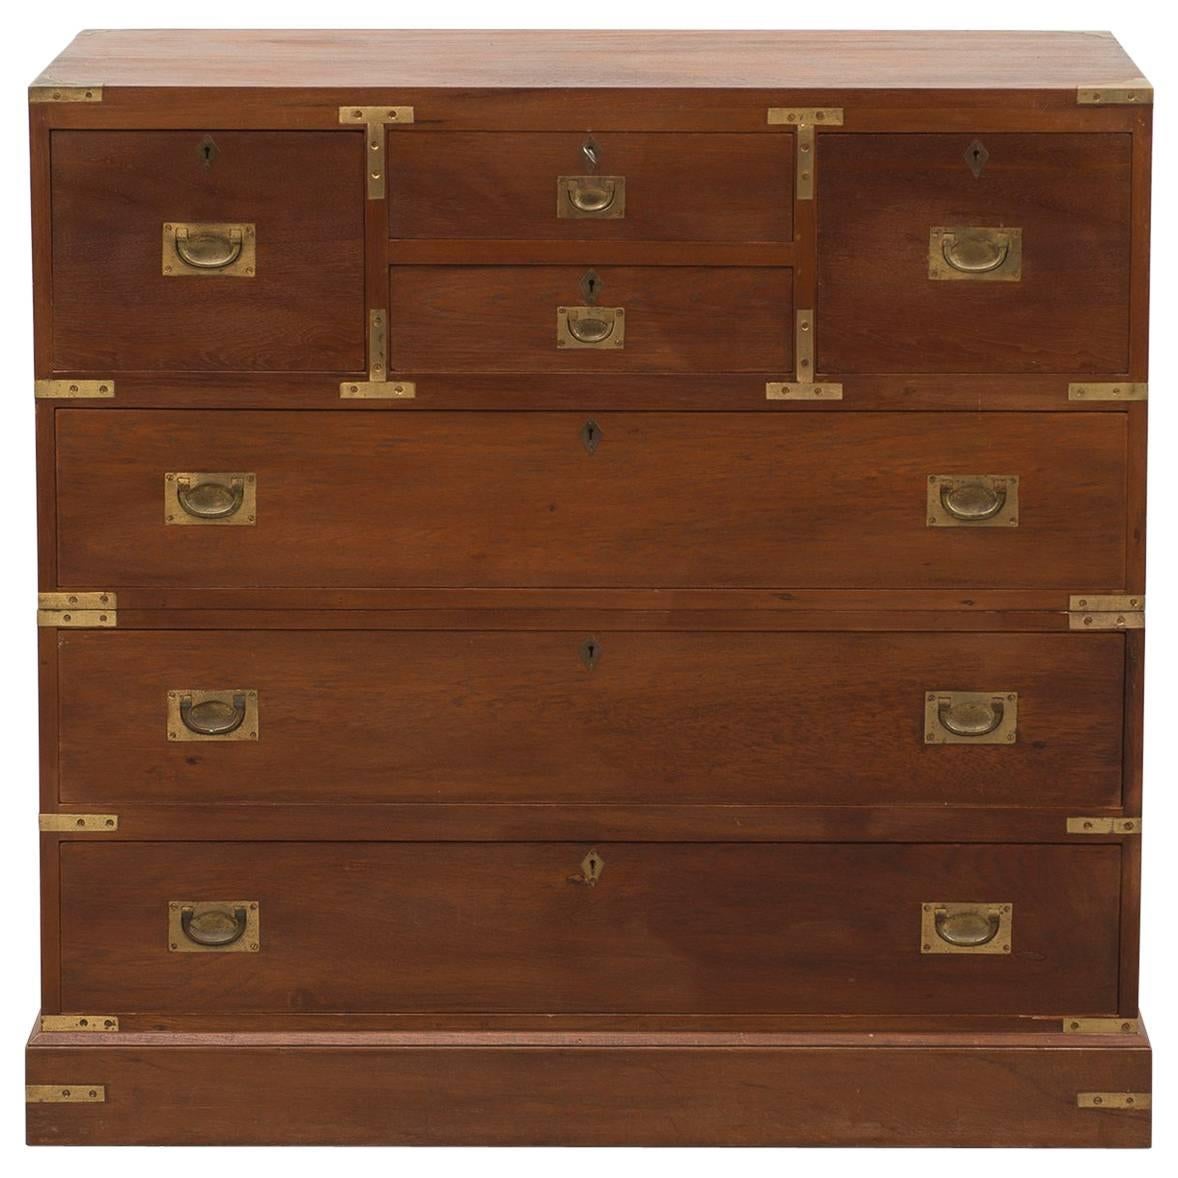 English Campaign Chest in Mahogany with Brass Hardware, Late 19th Century